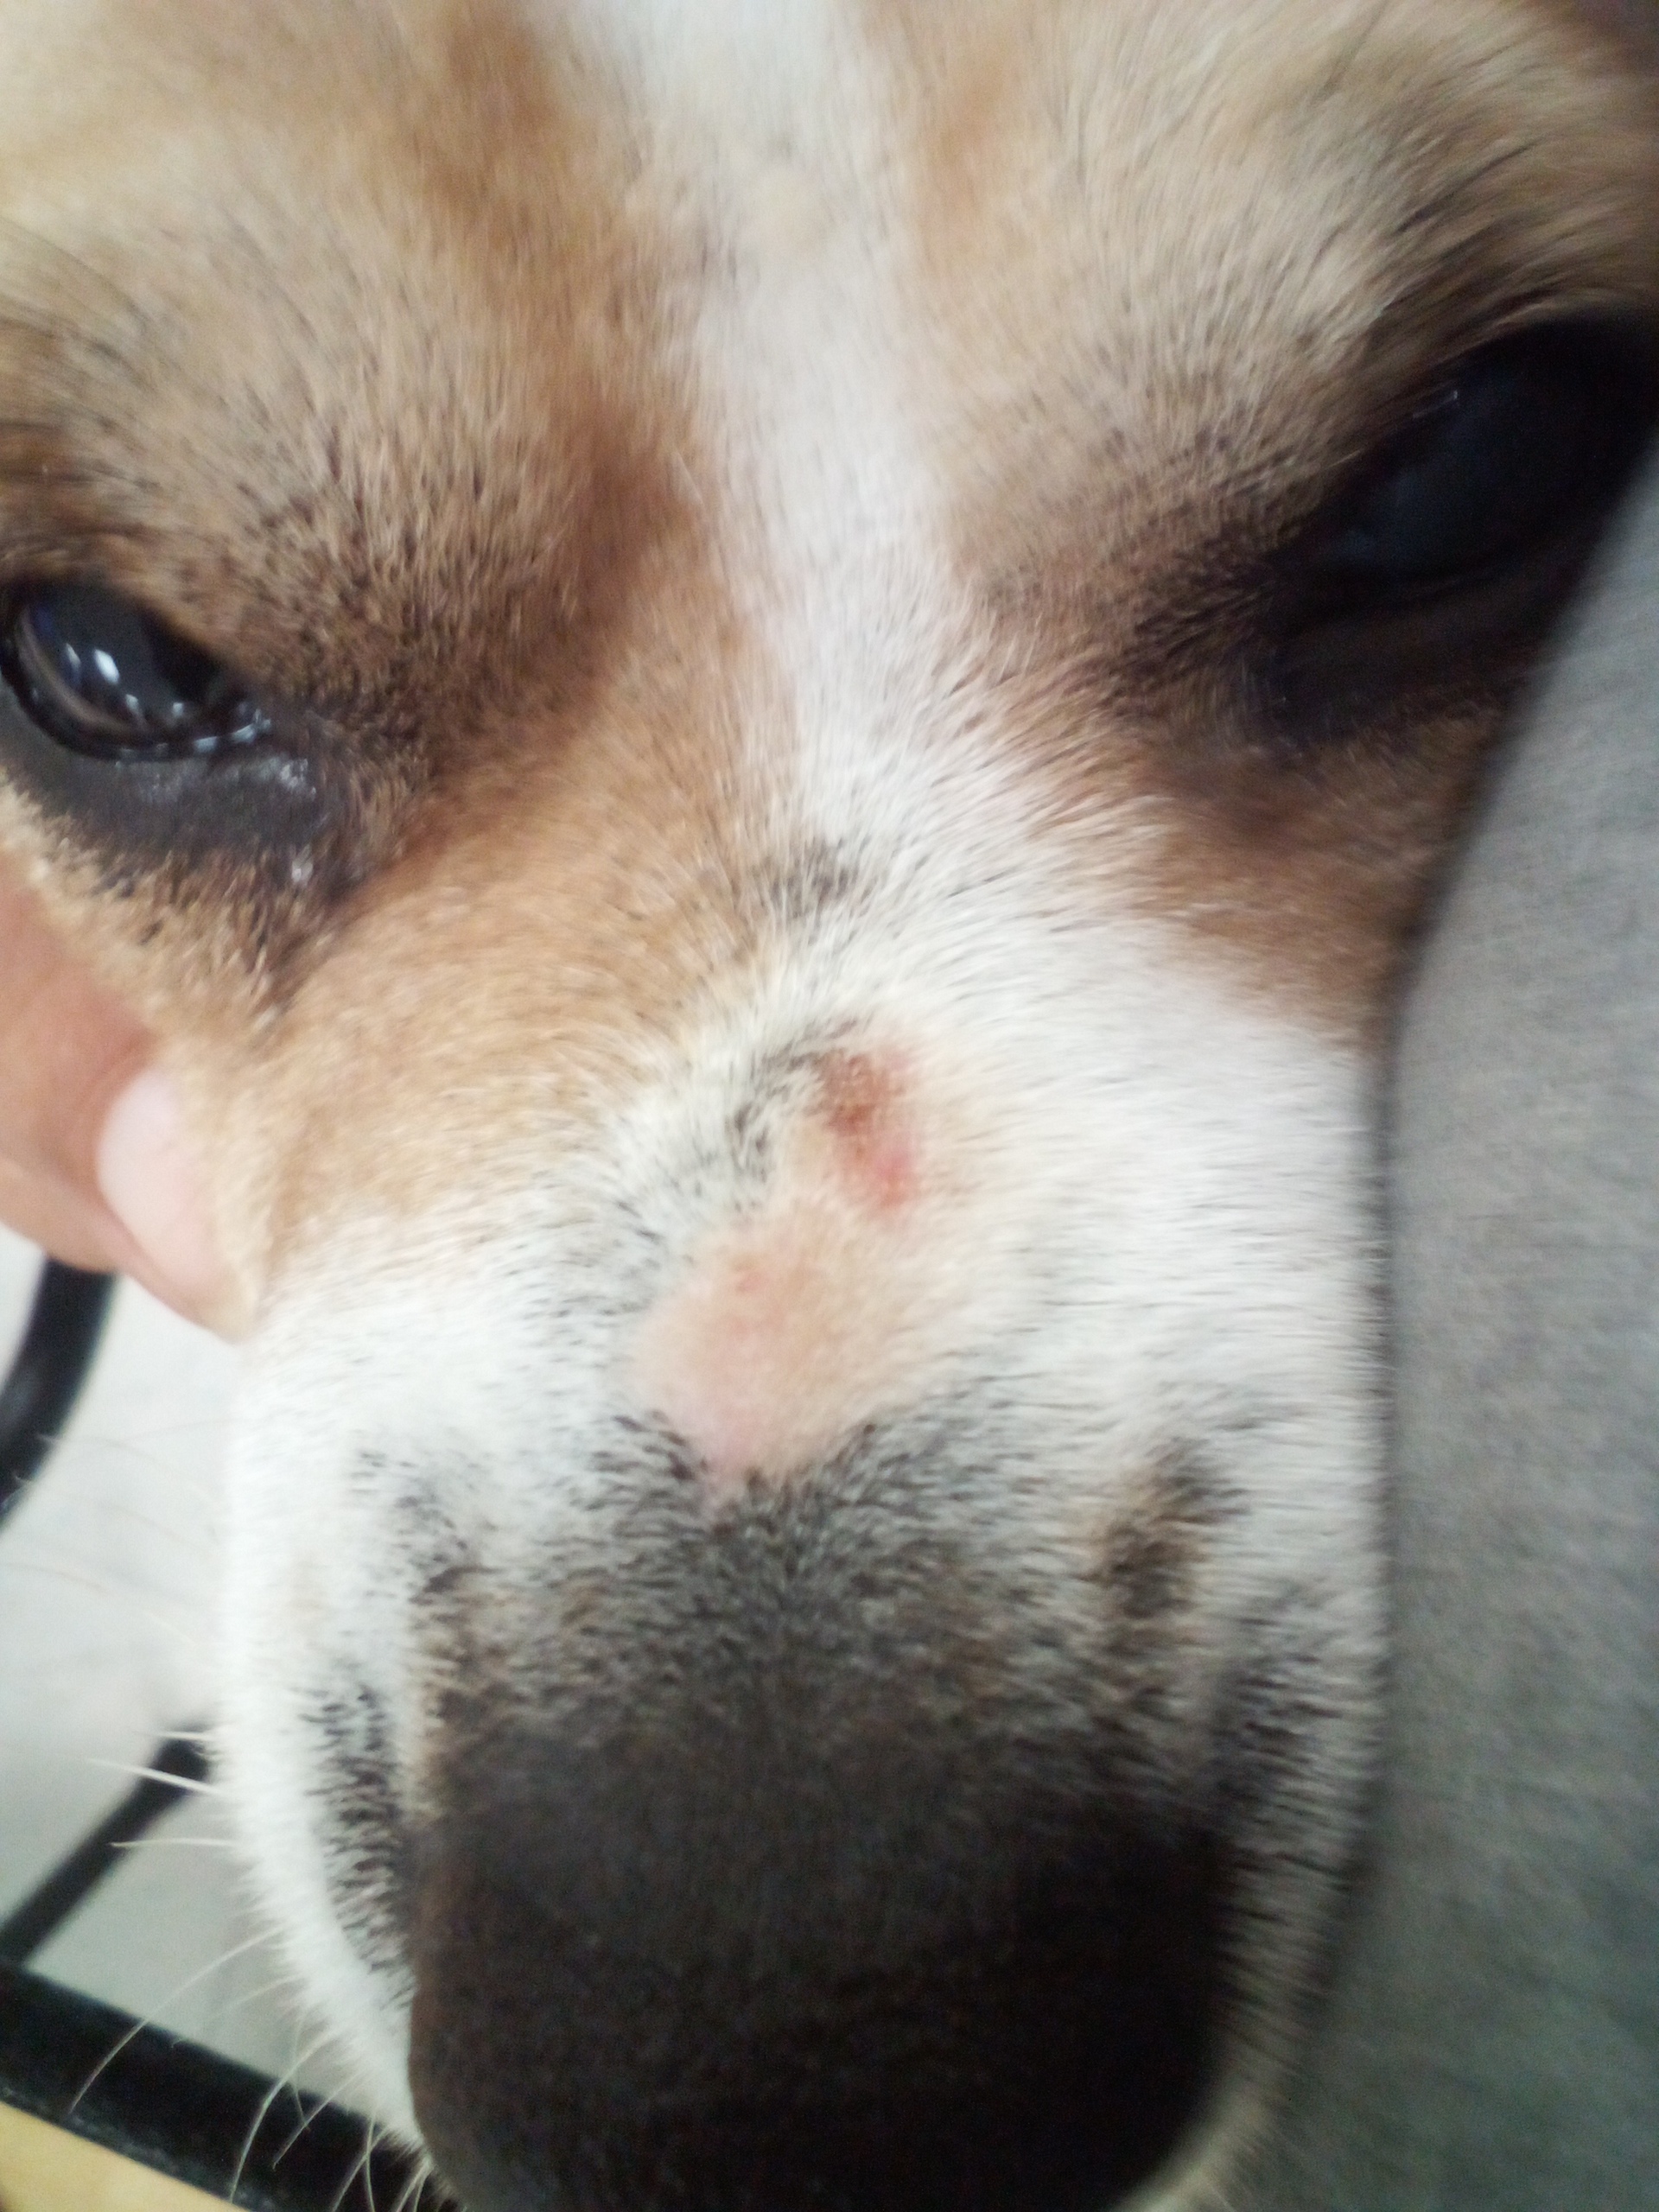 St Vincent De Paul complaint Harassing me and my service animal and my dog has a big old gash on his nose from a muscle